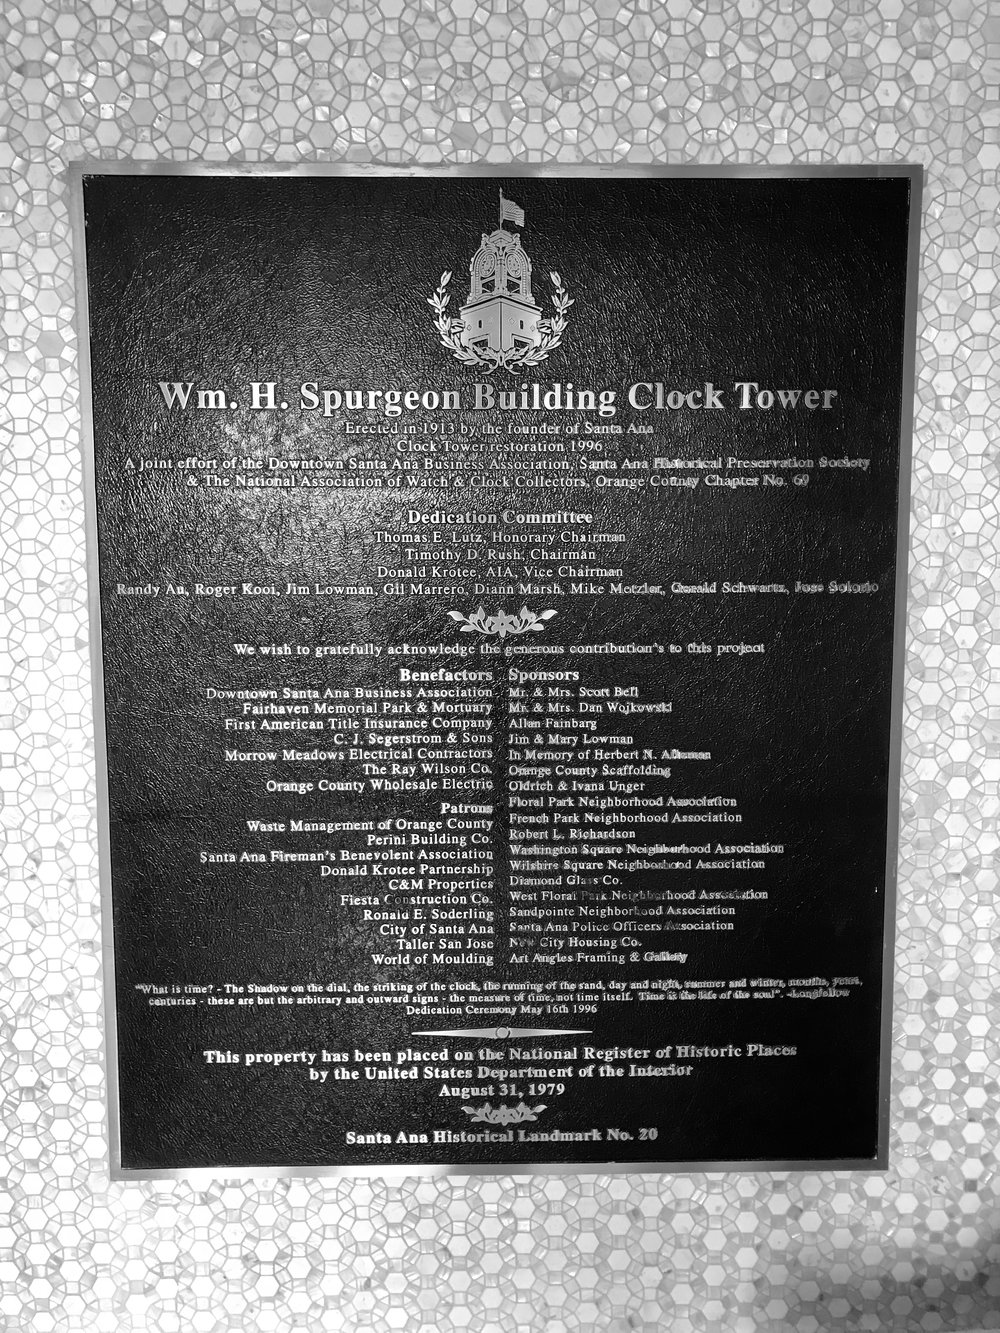  Dedication sign for clock tower in building lobby 